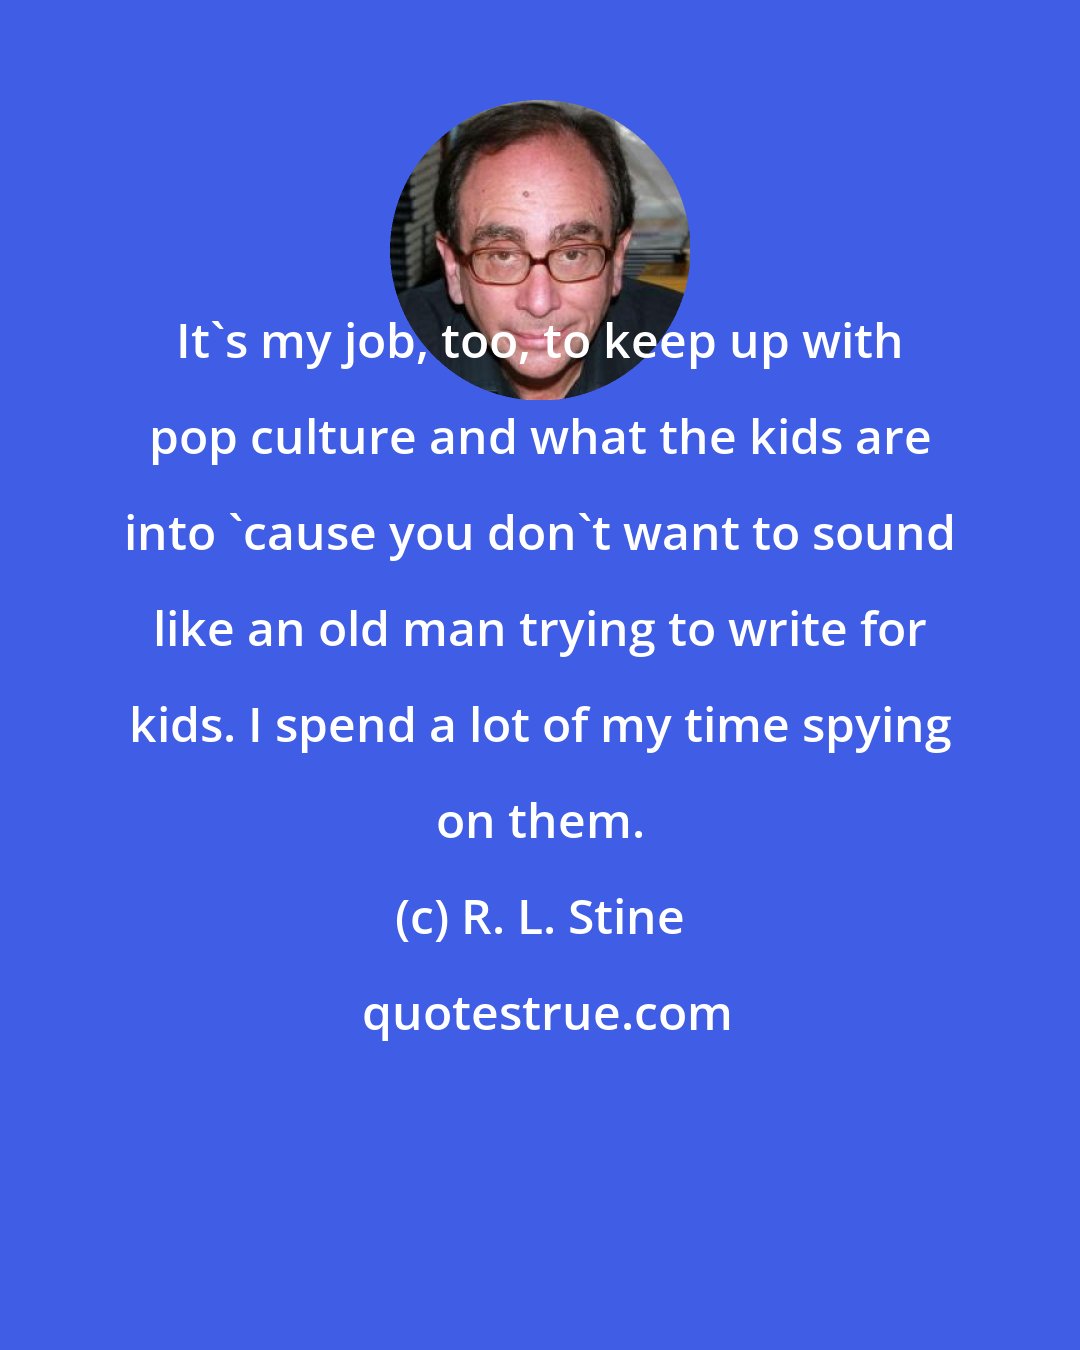 R. L. Stine: It's my job, too, to keep up with pop culture and what the kids are into 'cause you don't want to sound like an old man trying to write for kids. I spend a lot of my time spying on them.